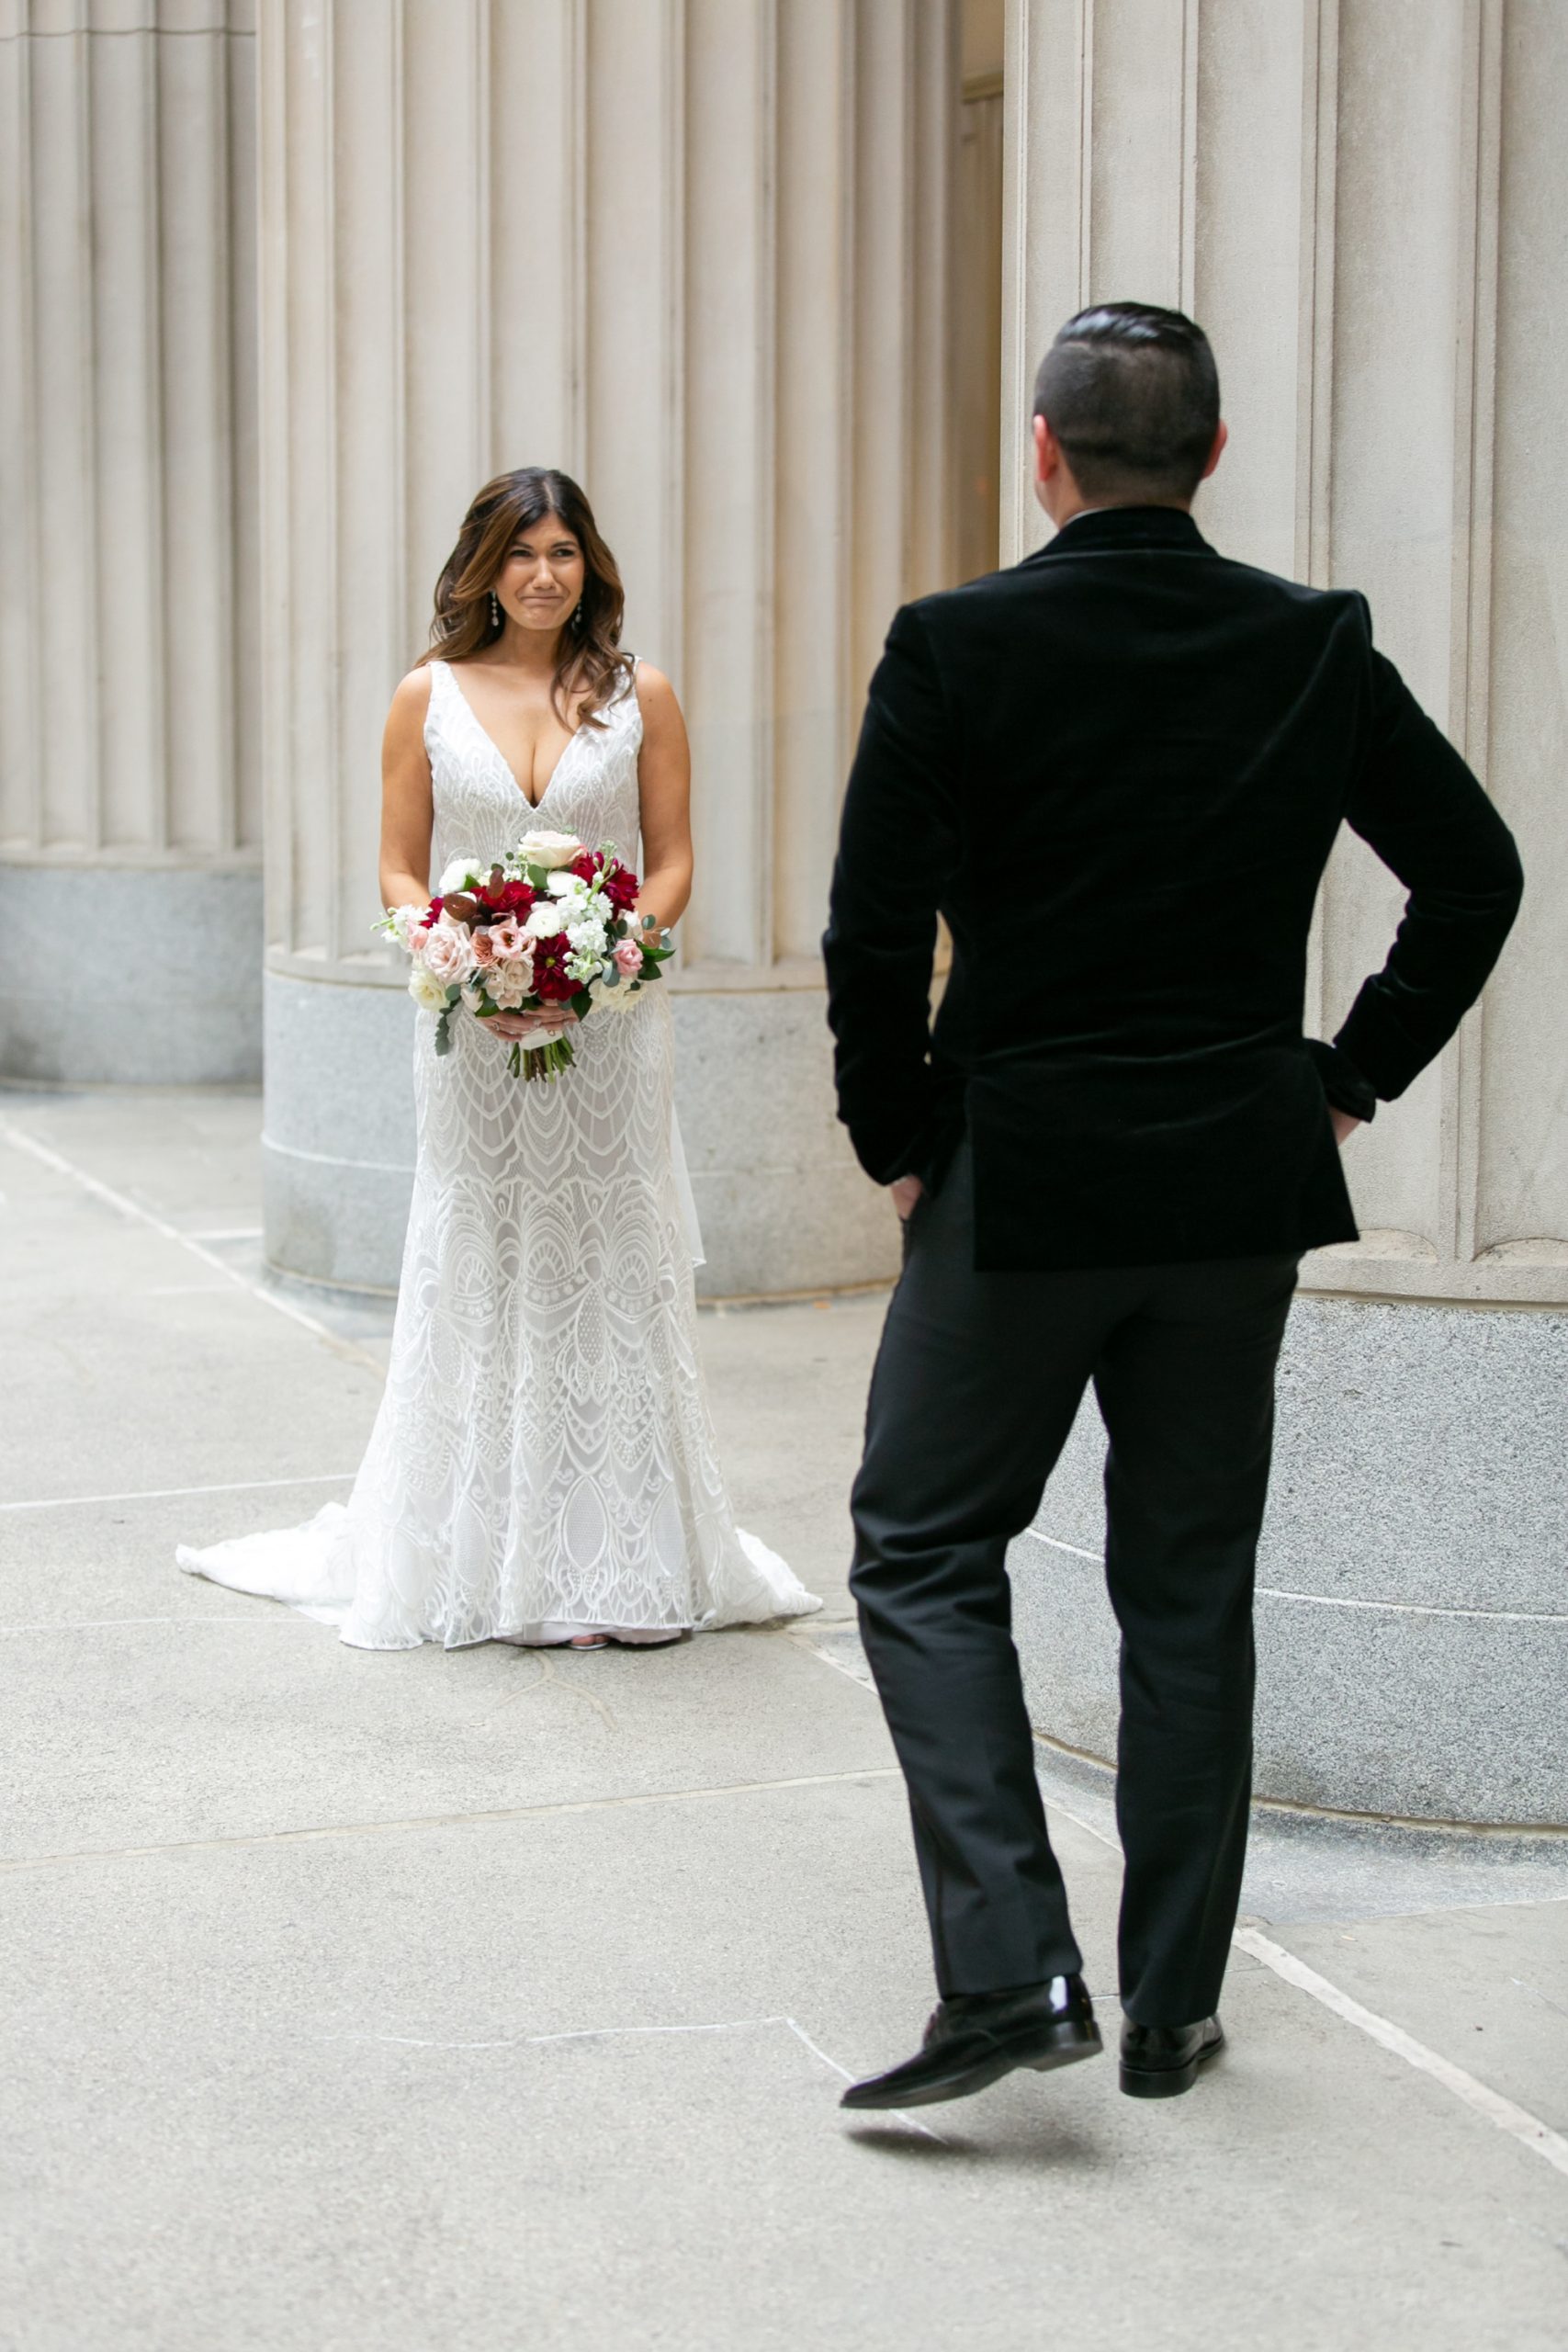 the bride and groom shared a sweet first look in downtown Chicago